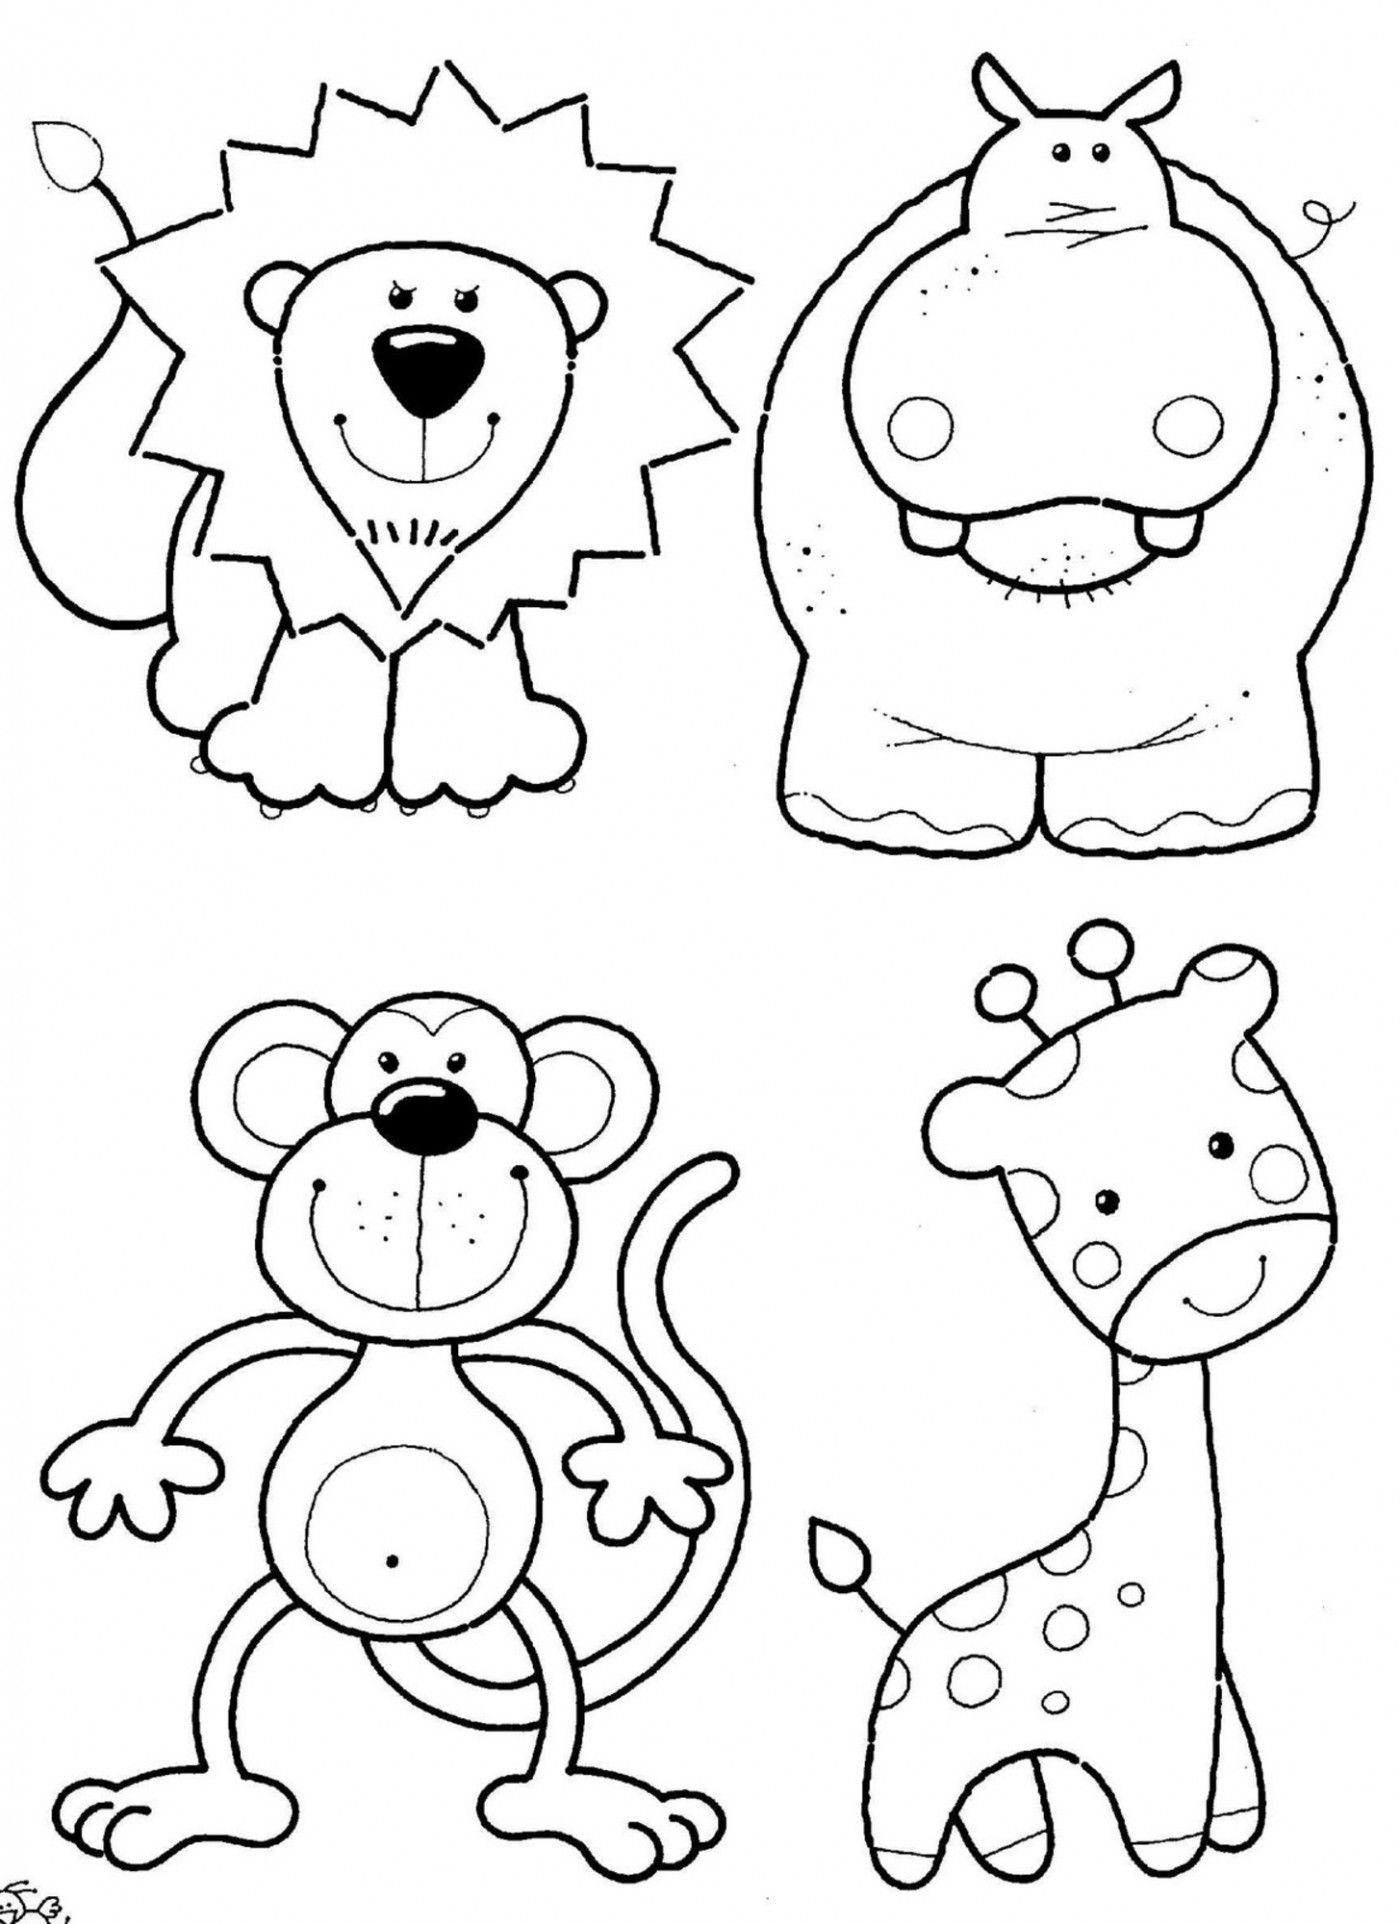 Download Animal Puppet Coloring Pages - Coloring Pages For All Ages ...